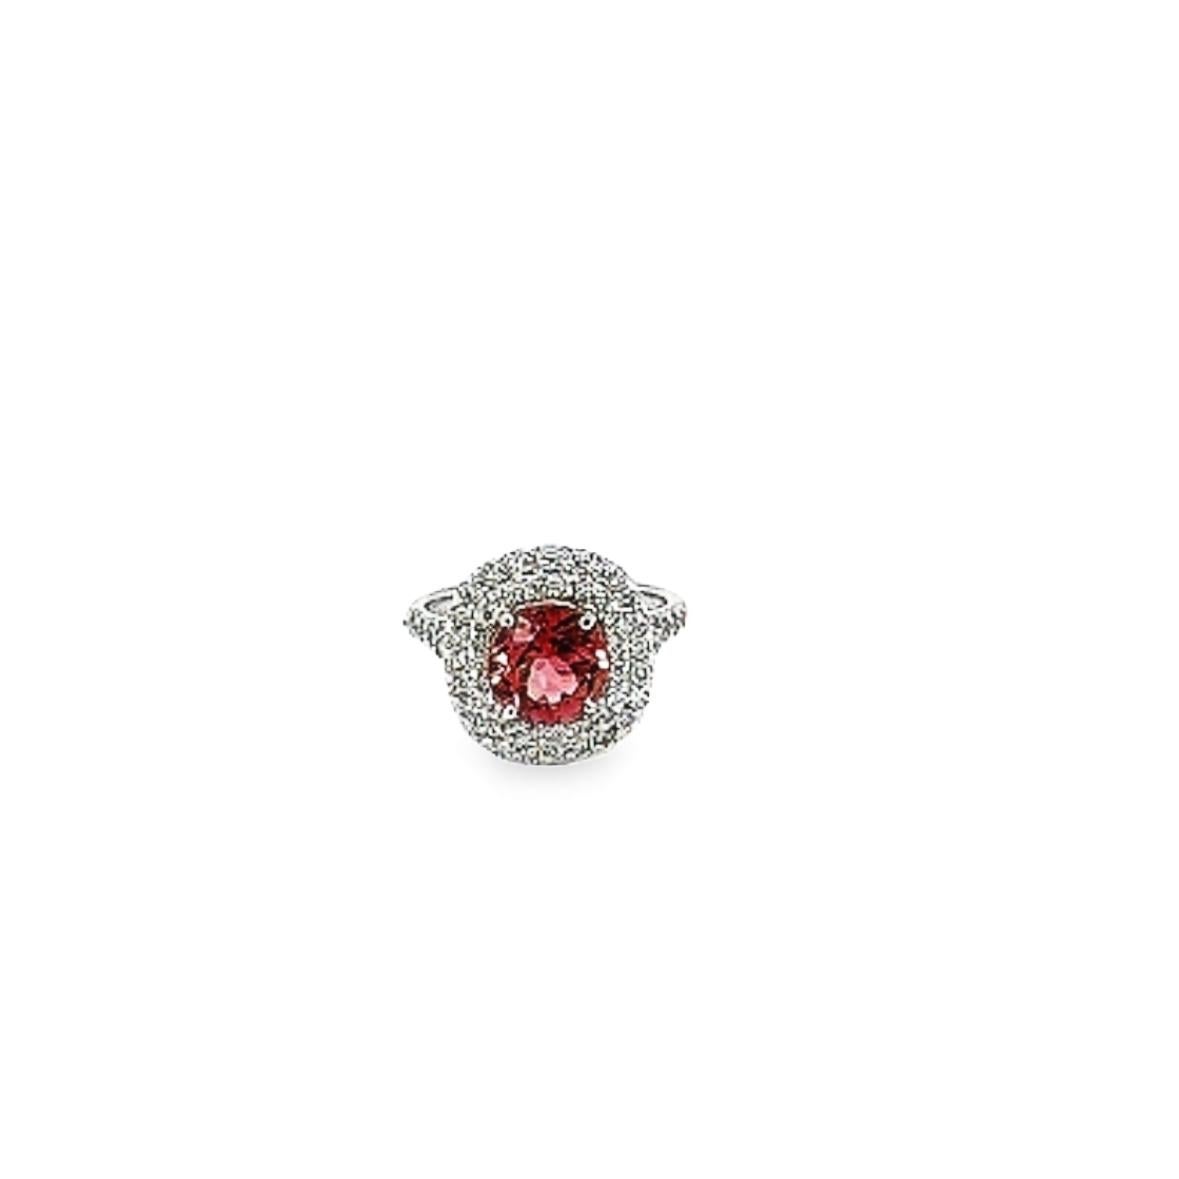 2.75 Carat Double Halo Tourmaline Diamond White Gold Engagement Ring

This ring has a 1.90 Carat Round Cut Tourmaline that is set in the center of the ring and is surrounded by a double halo of 70 Round Cut Diamonds that weigh 0.85 Carats (Clarity: